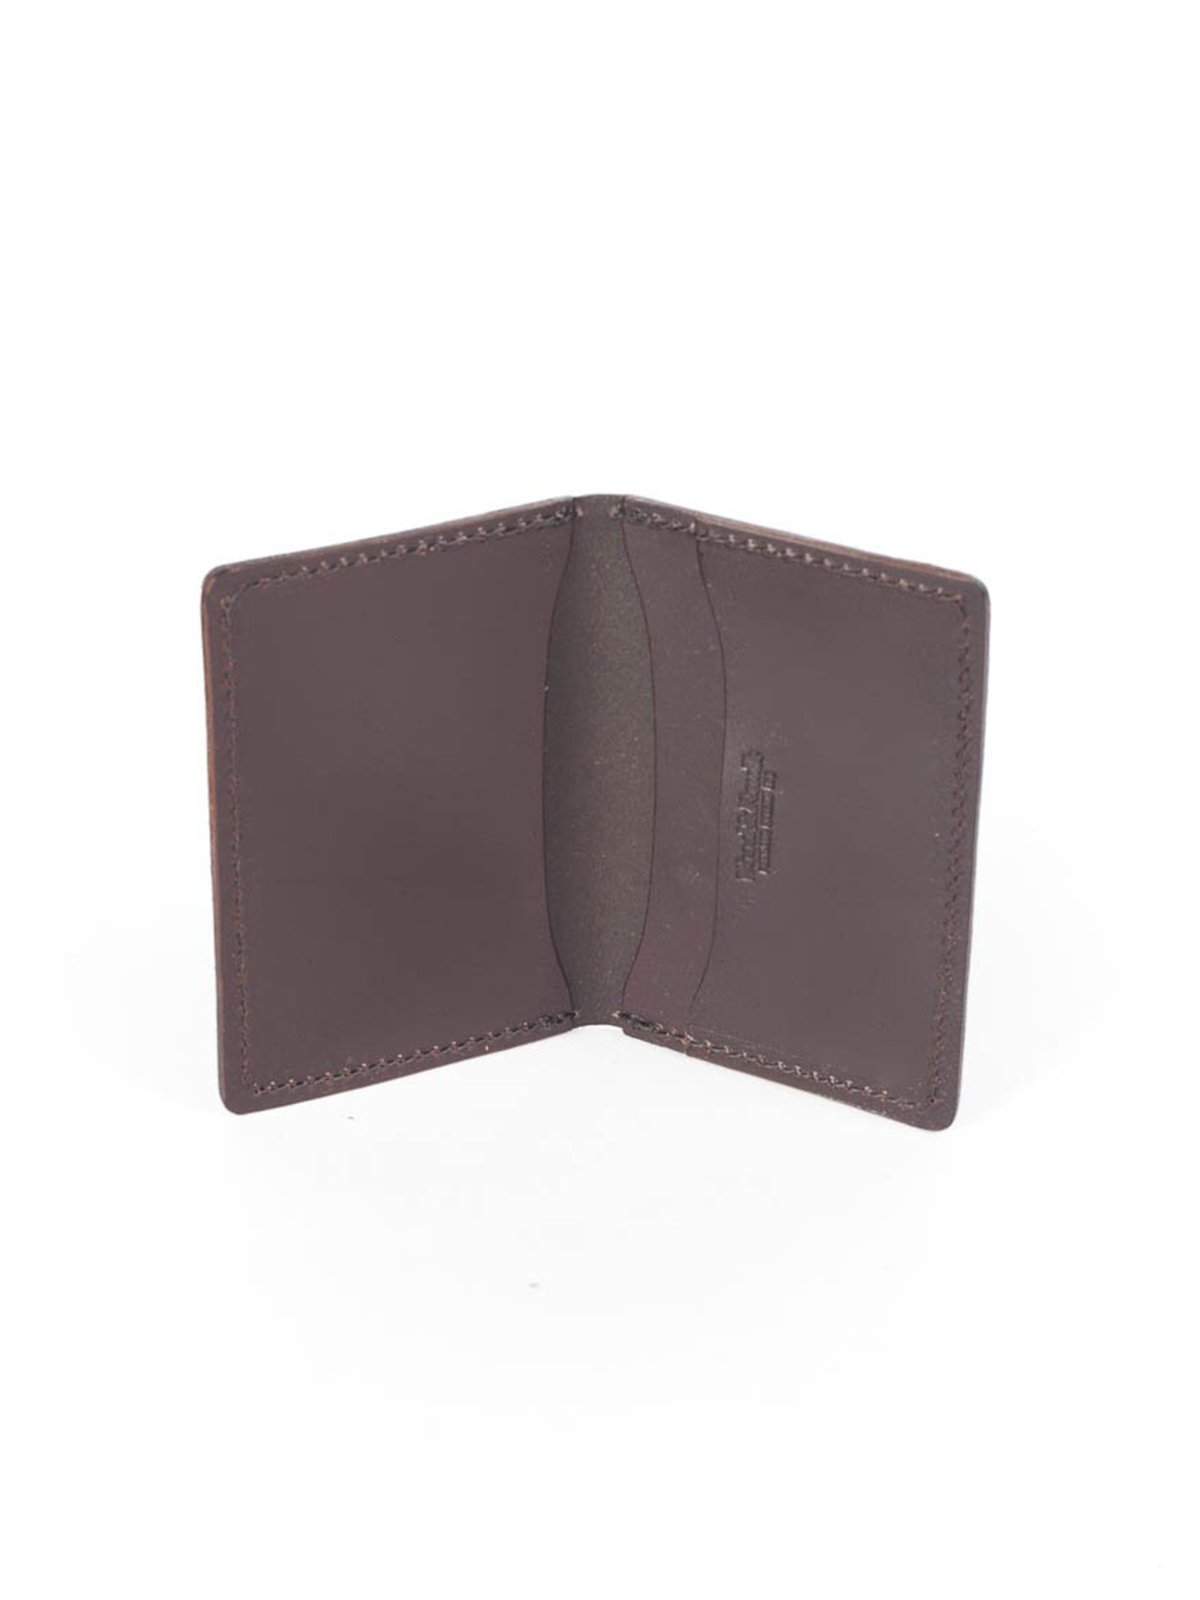 Wood&amp;Faulk Front Pocket Brown Chromexcel Wallet - MORE by Morello Indonesia